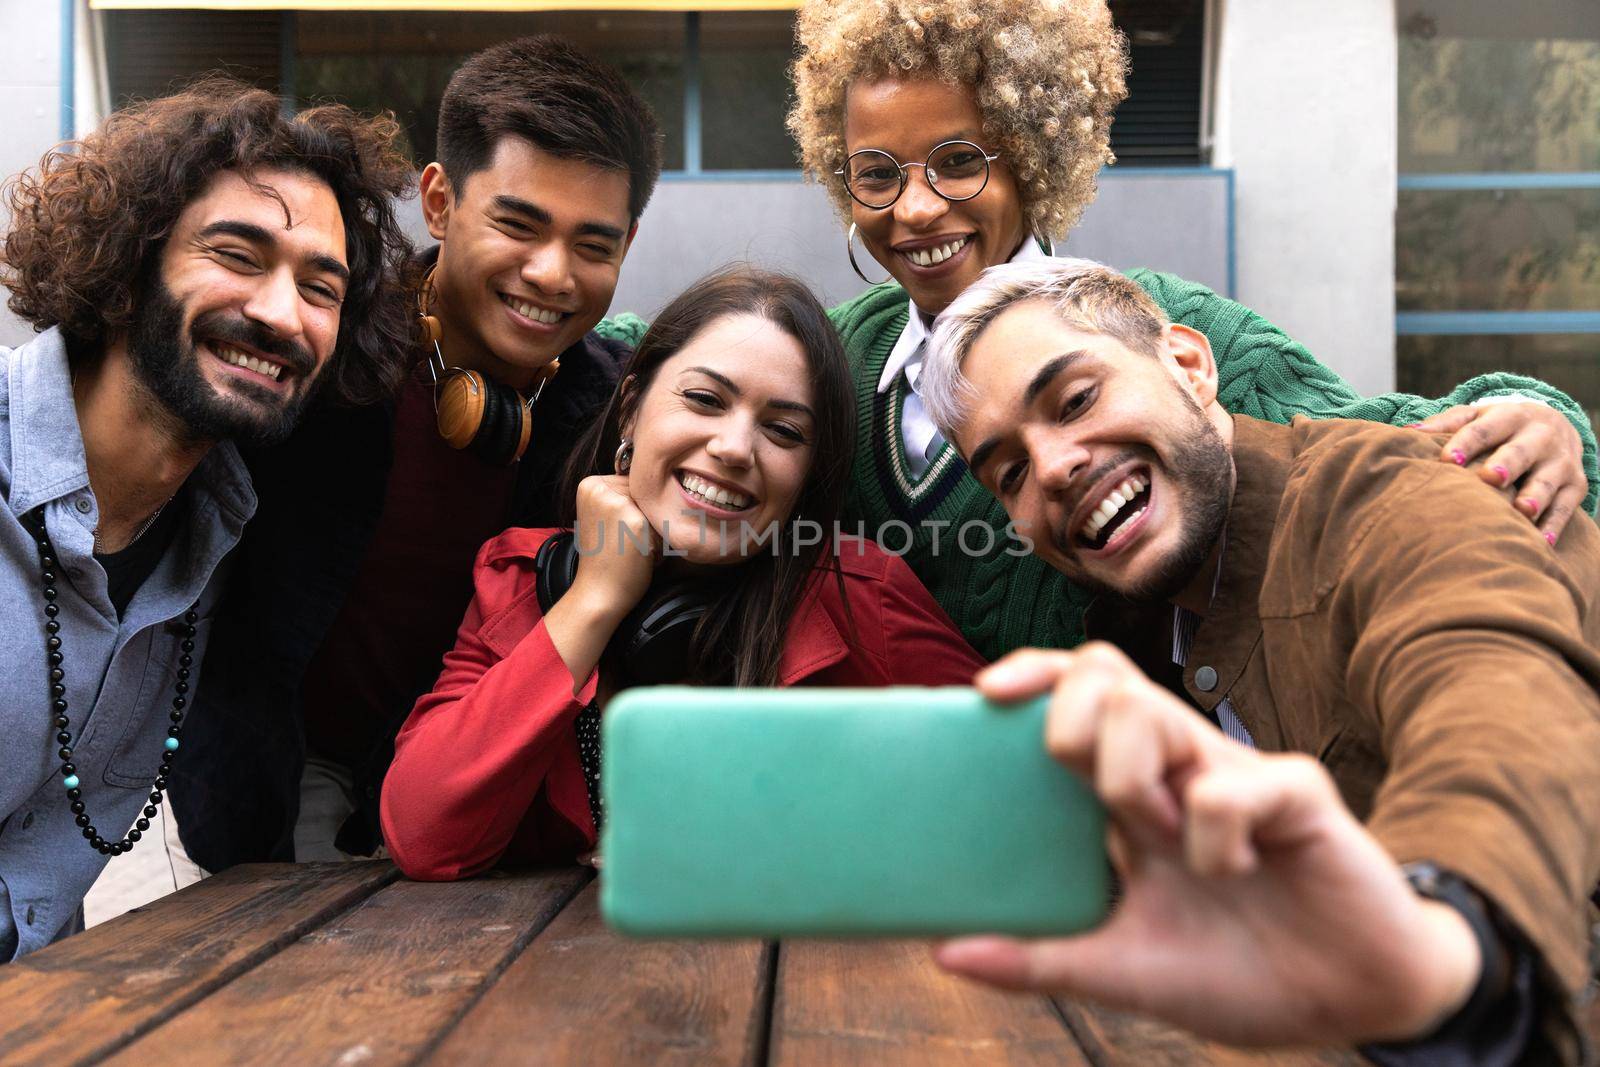 Smiling multiracial young friends take selfie together with mobile phone outdoors.Technology and friendship concept.